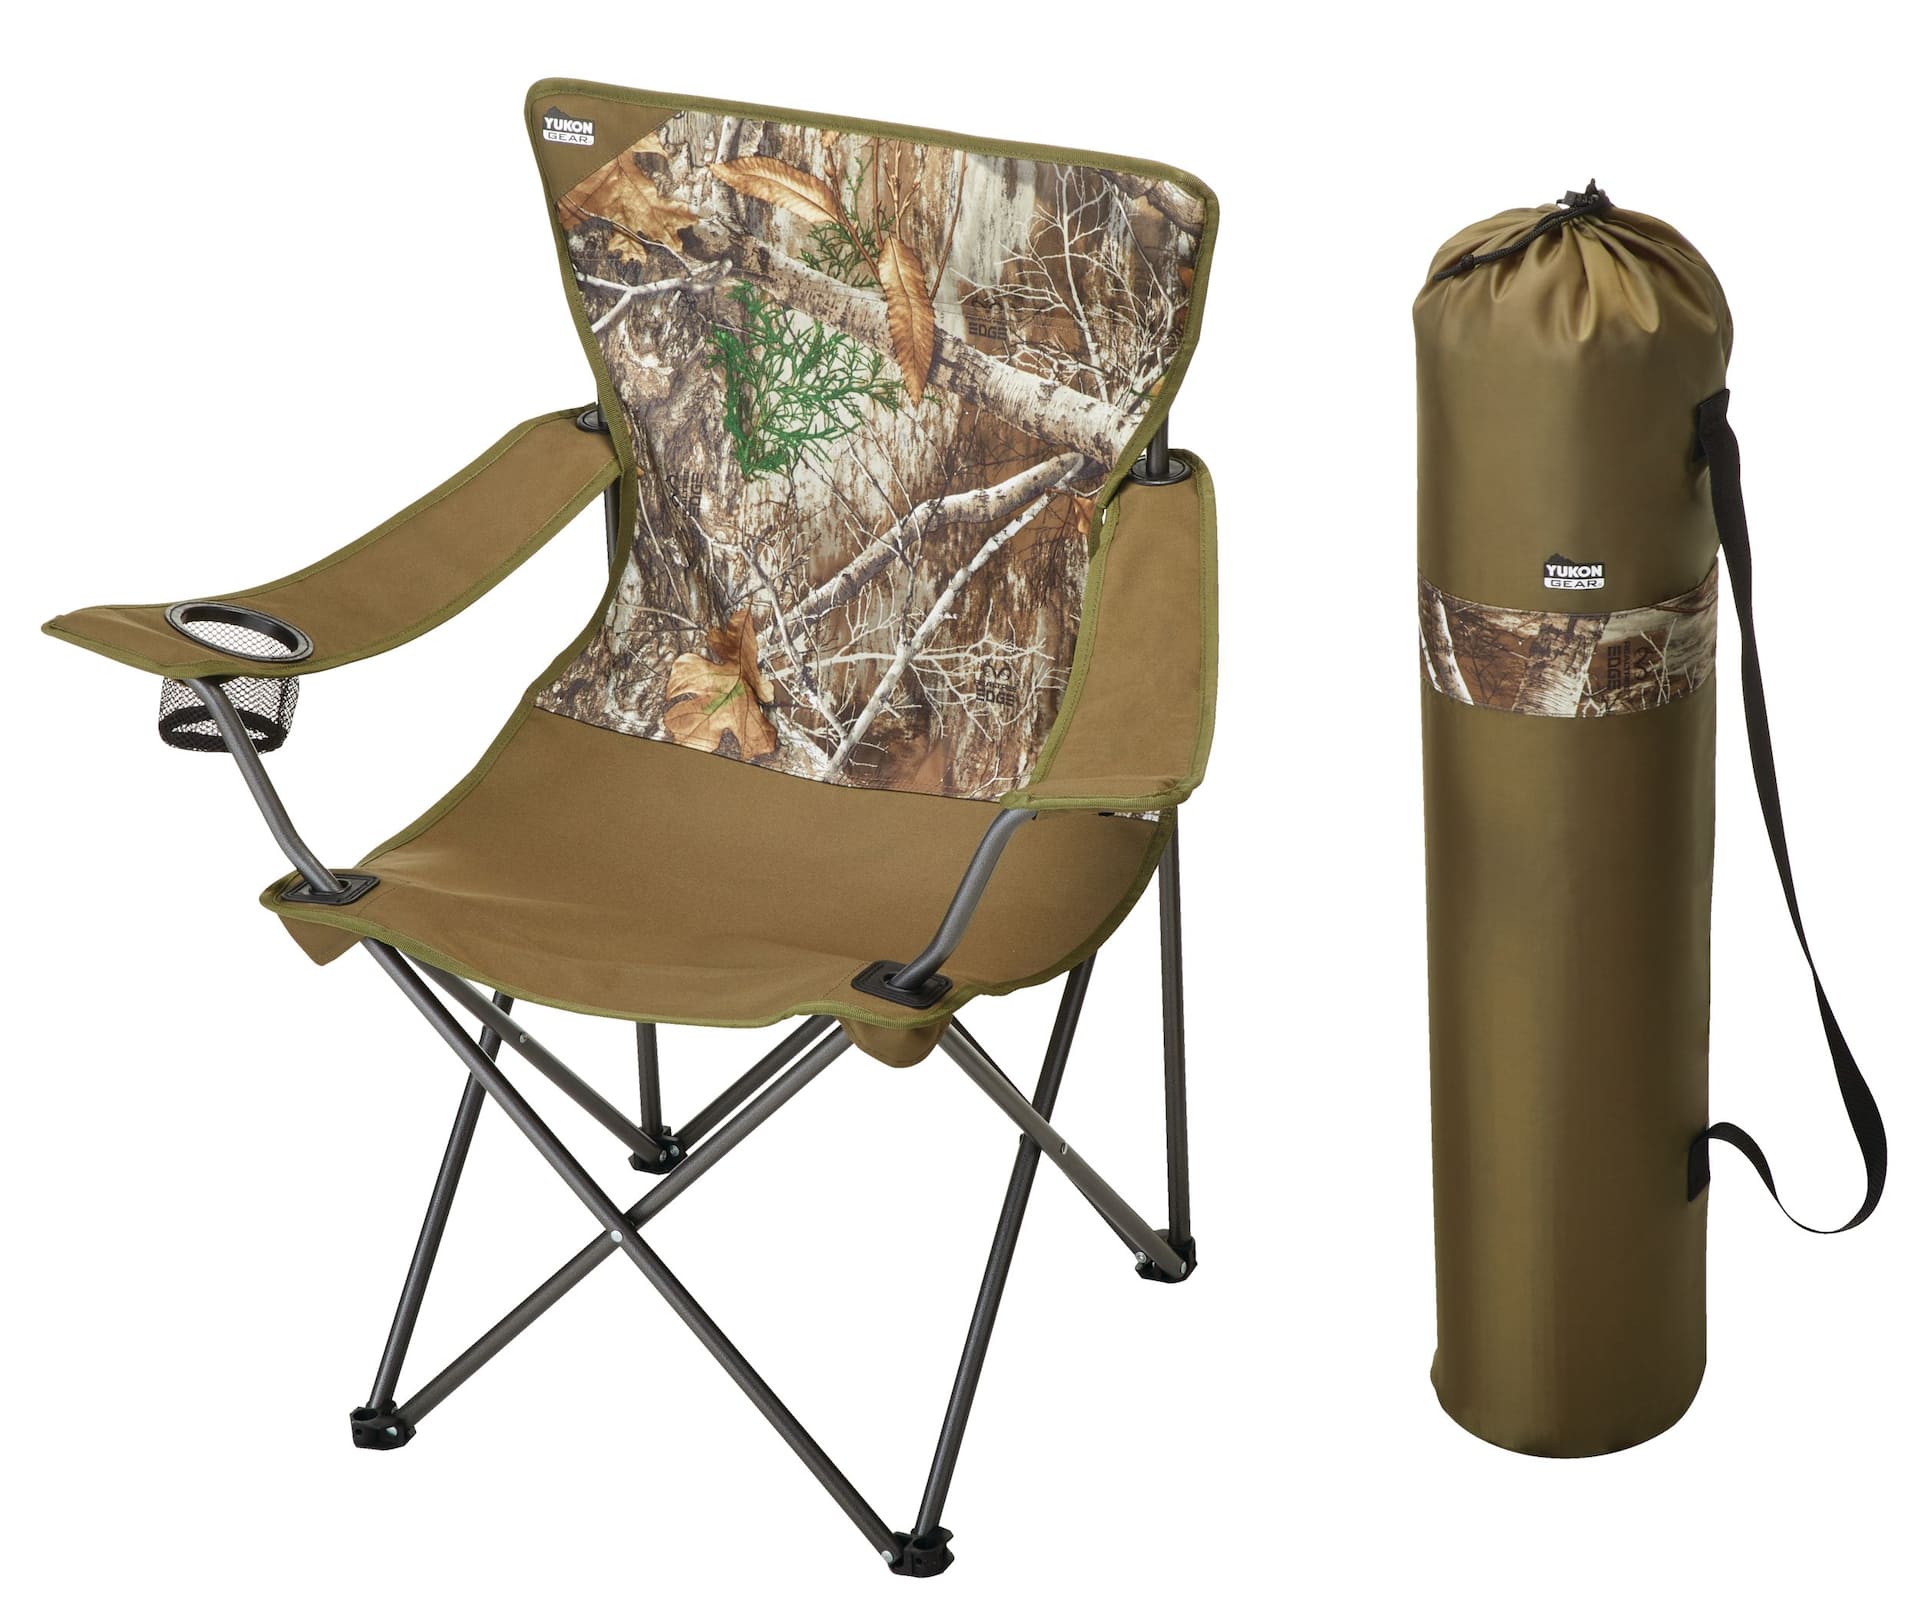 Yukon Gear Realtree Camo Portable Folding Camping/Hunting Quad Chair w/ Cup  Holder & Carry Bag